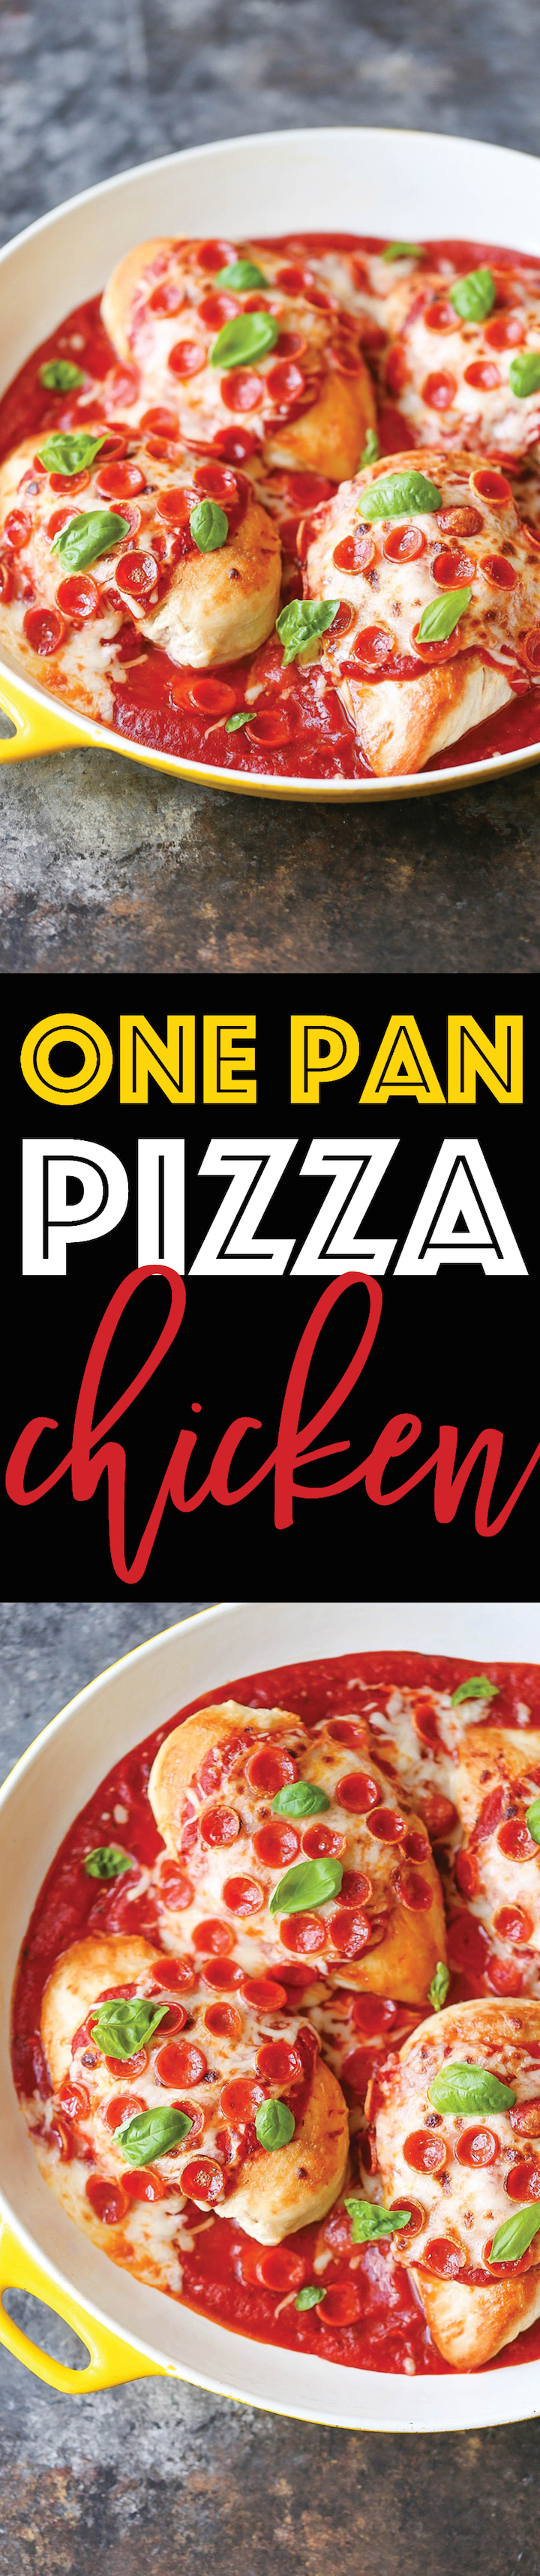 One Pan Pizza Chicken - Win win chicken dinner! A ONE PAN meal. And it's a LOW CARB cheesy goodness meal for the whole family to enjoy on a busy weeknight!